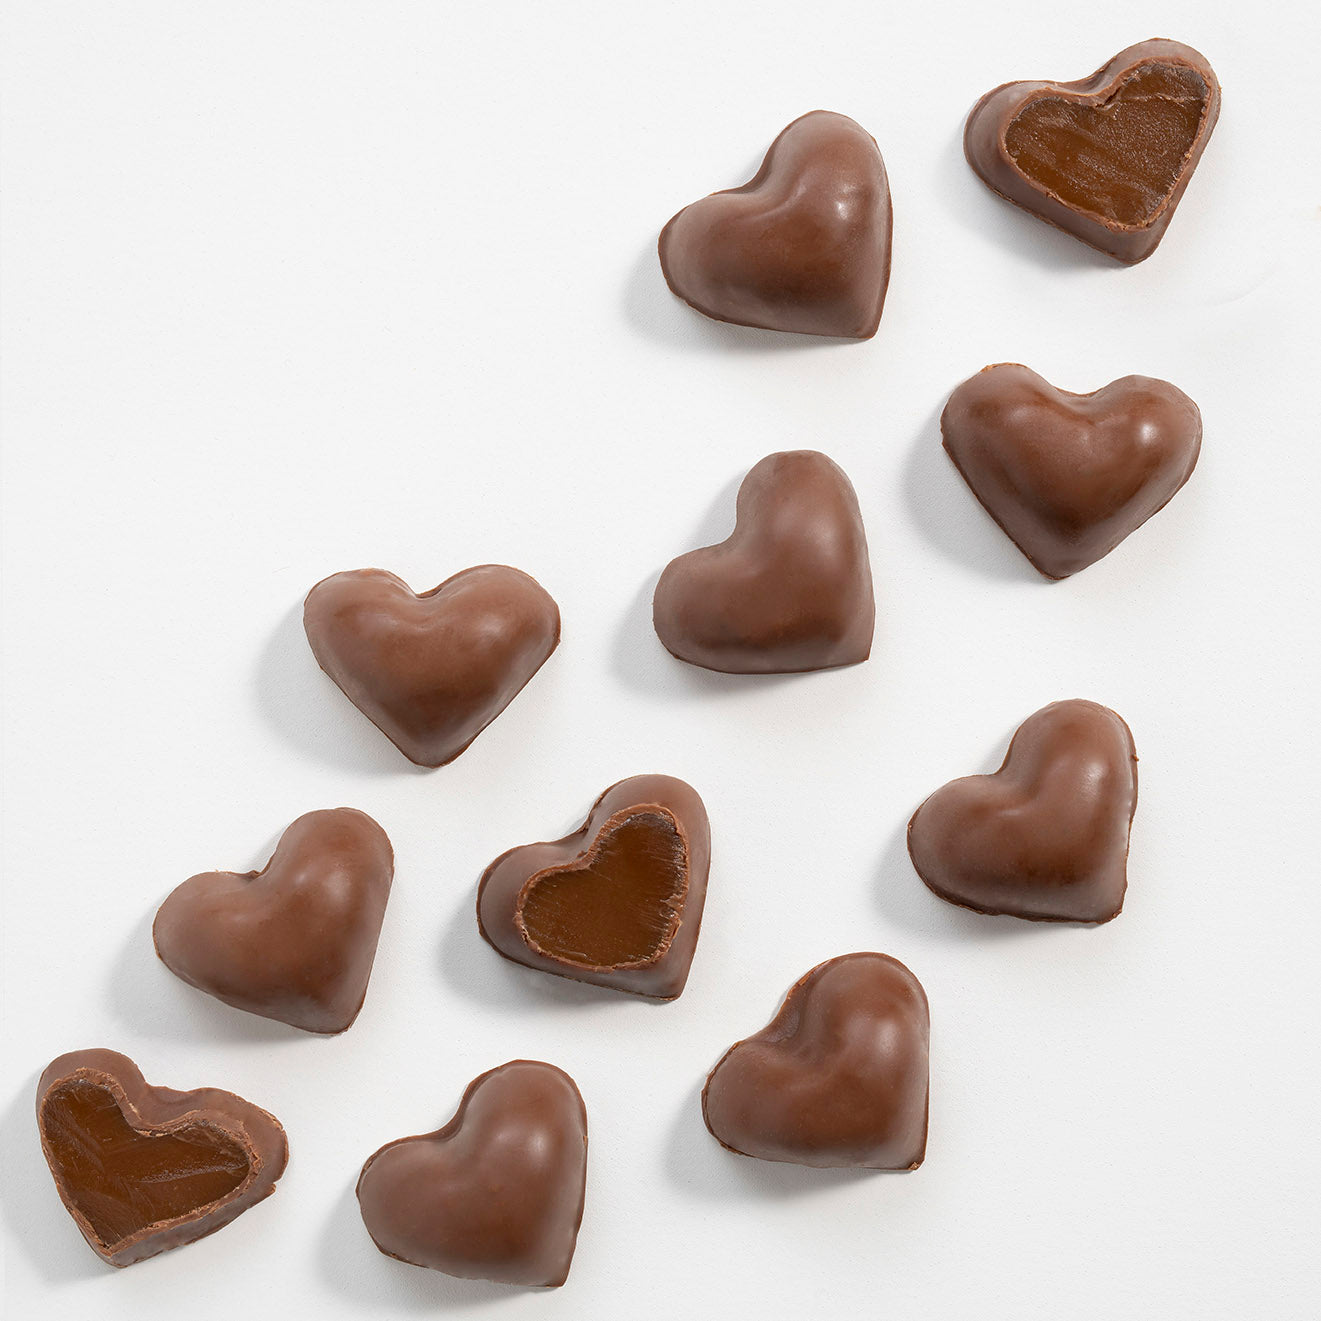 Chocolate dipped Salted Caramel Heart each